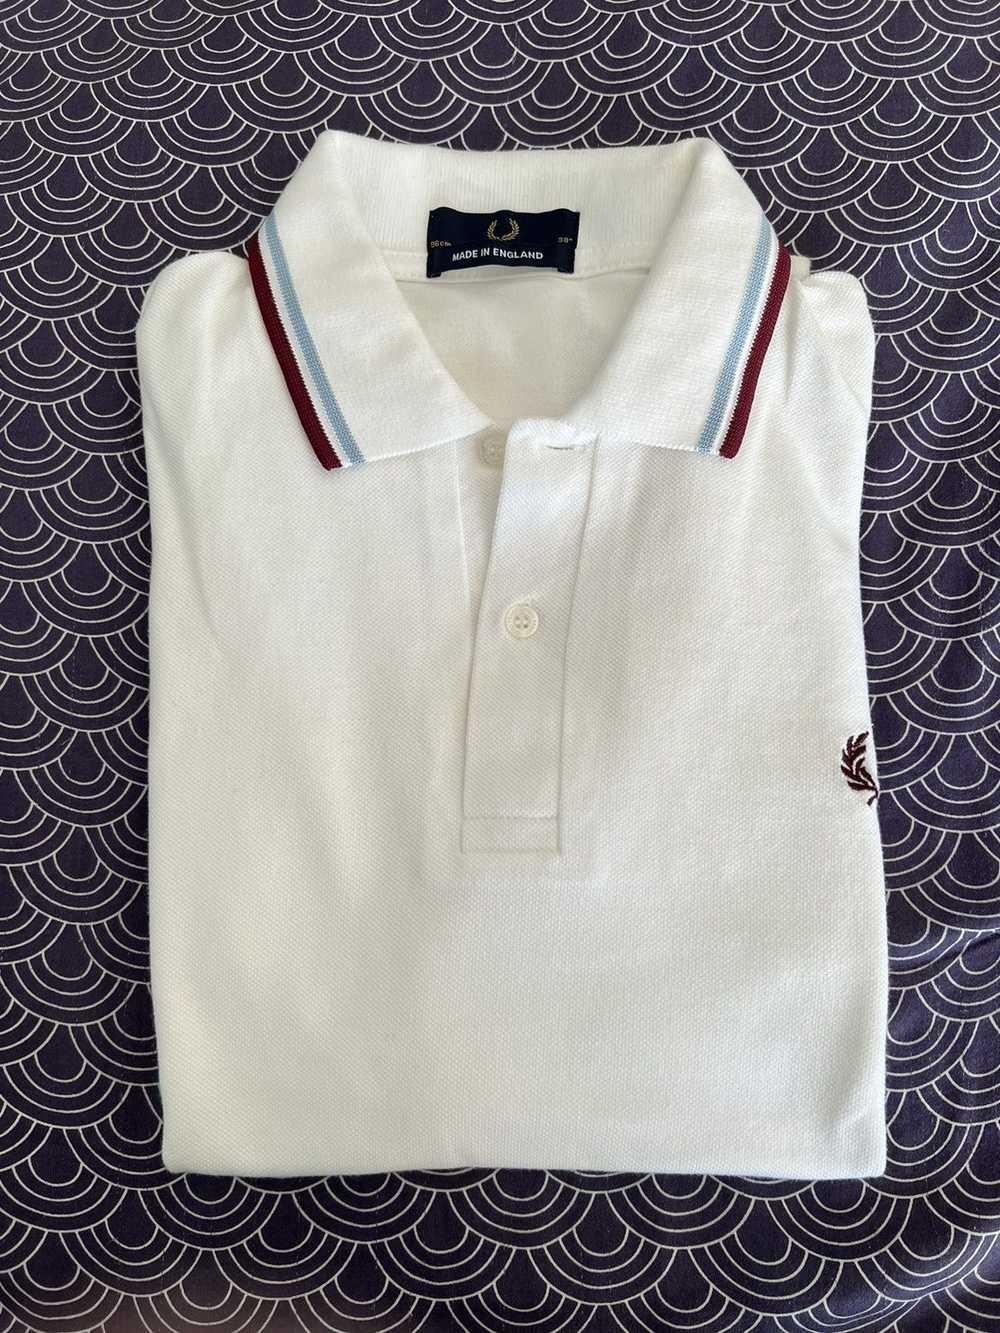 Fred Perry The Fred Perry Shirt (MADE IN ENGLAND) - image 4